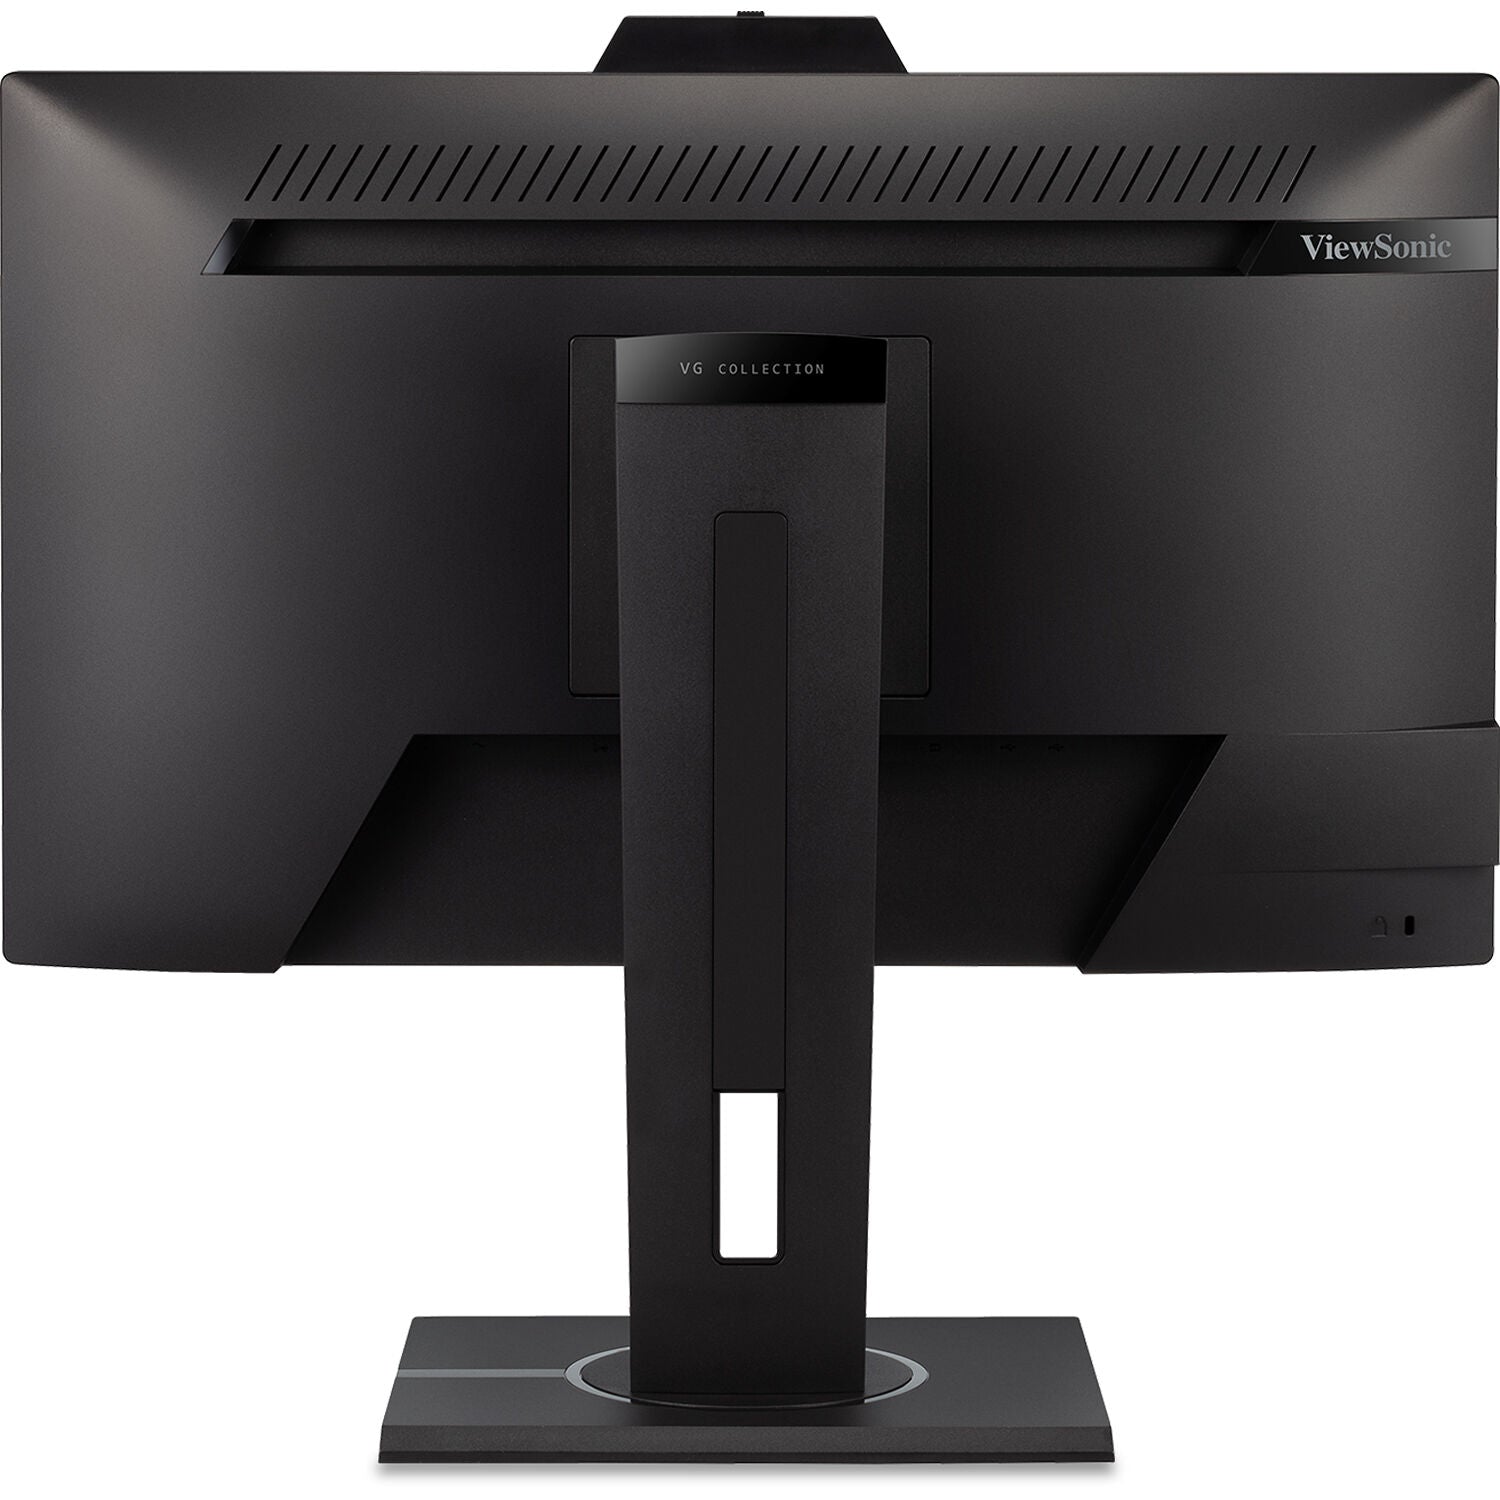 ViewSonic VG2440-S 24" 16:9 Video Conferencing IPS Monitor - Certified Refurbished